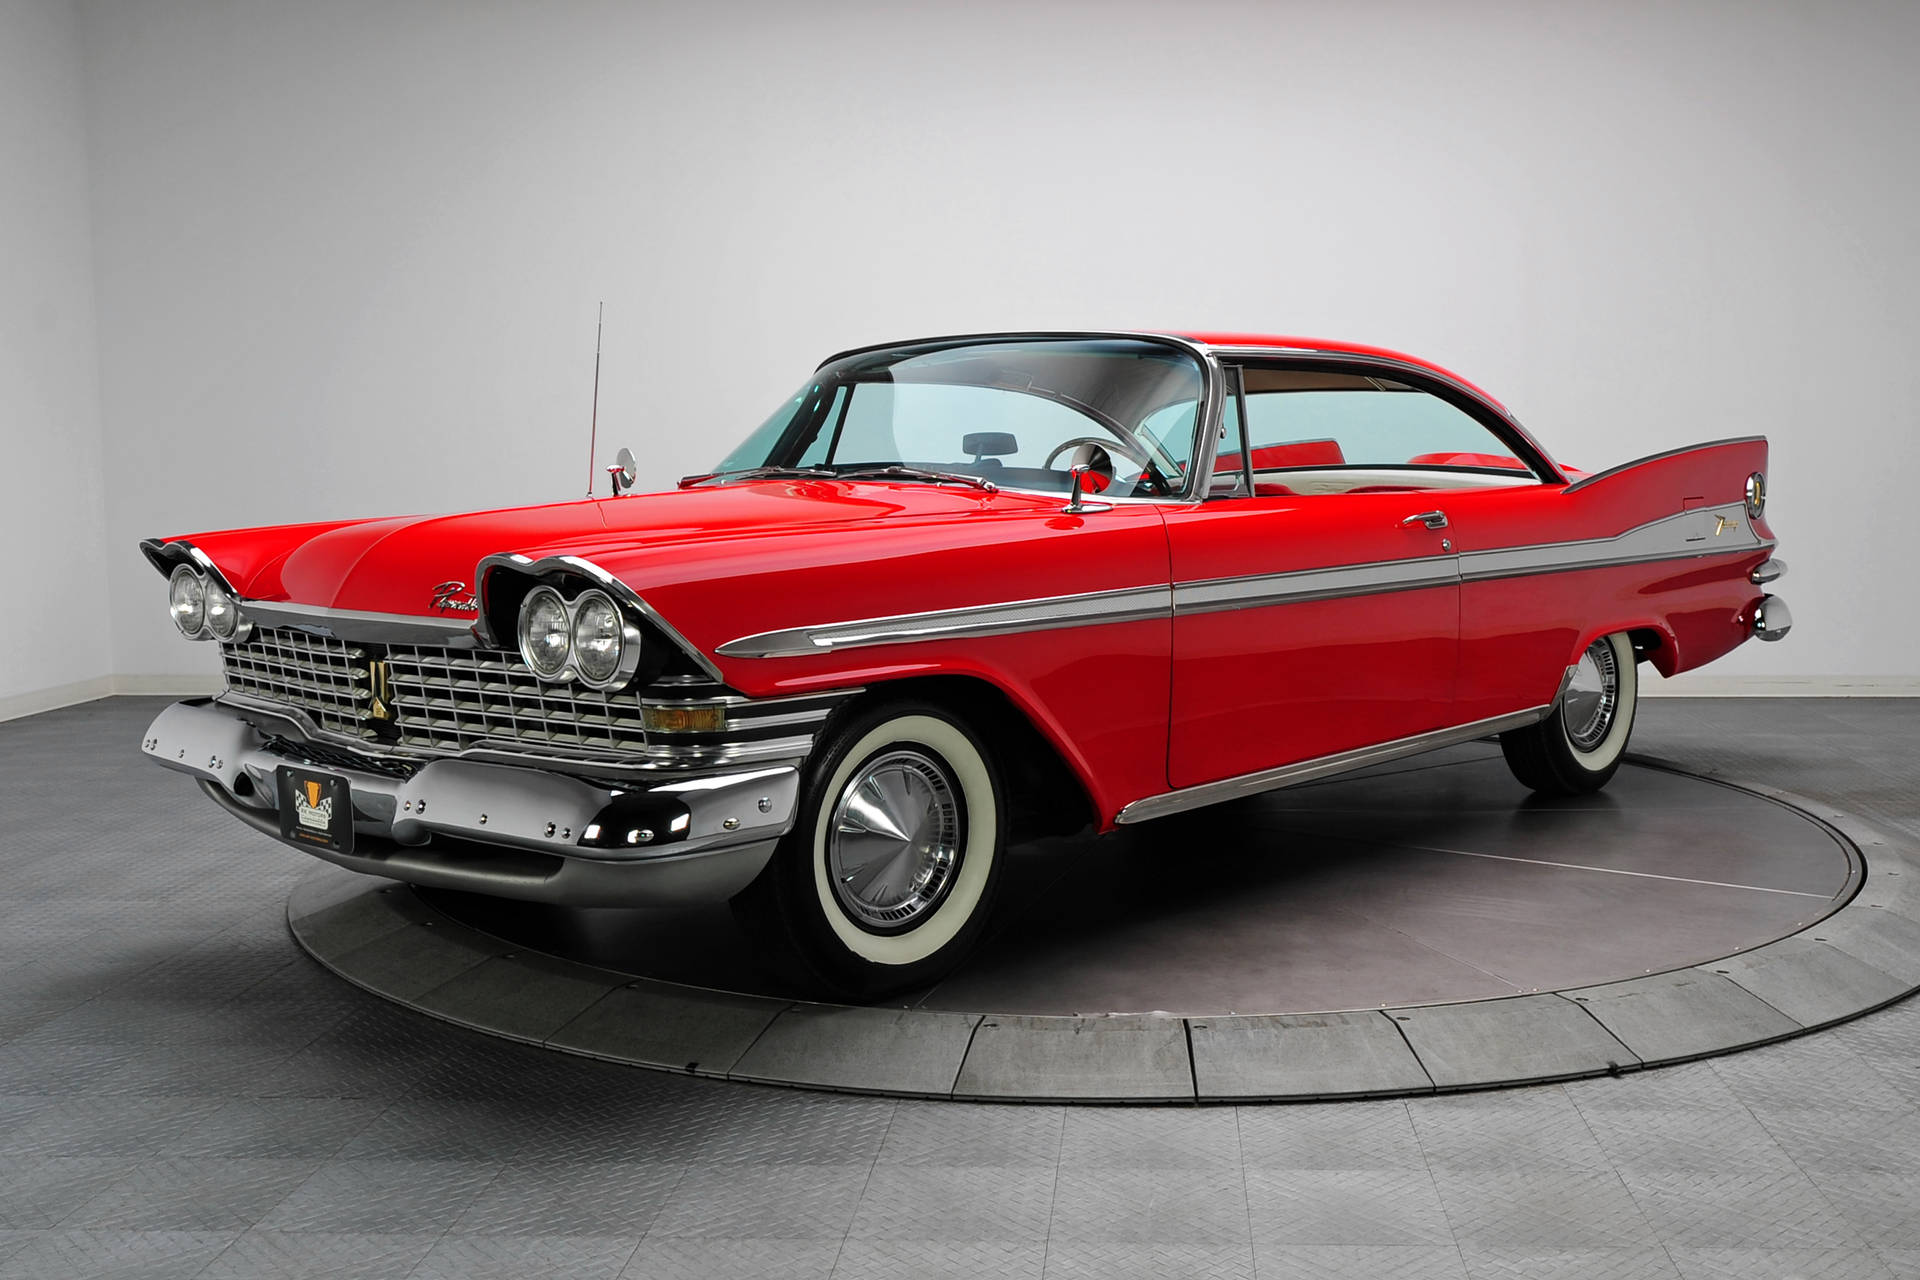 1959 Plymouth Fury Red Vintage Car Wallpaper